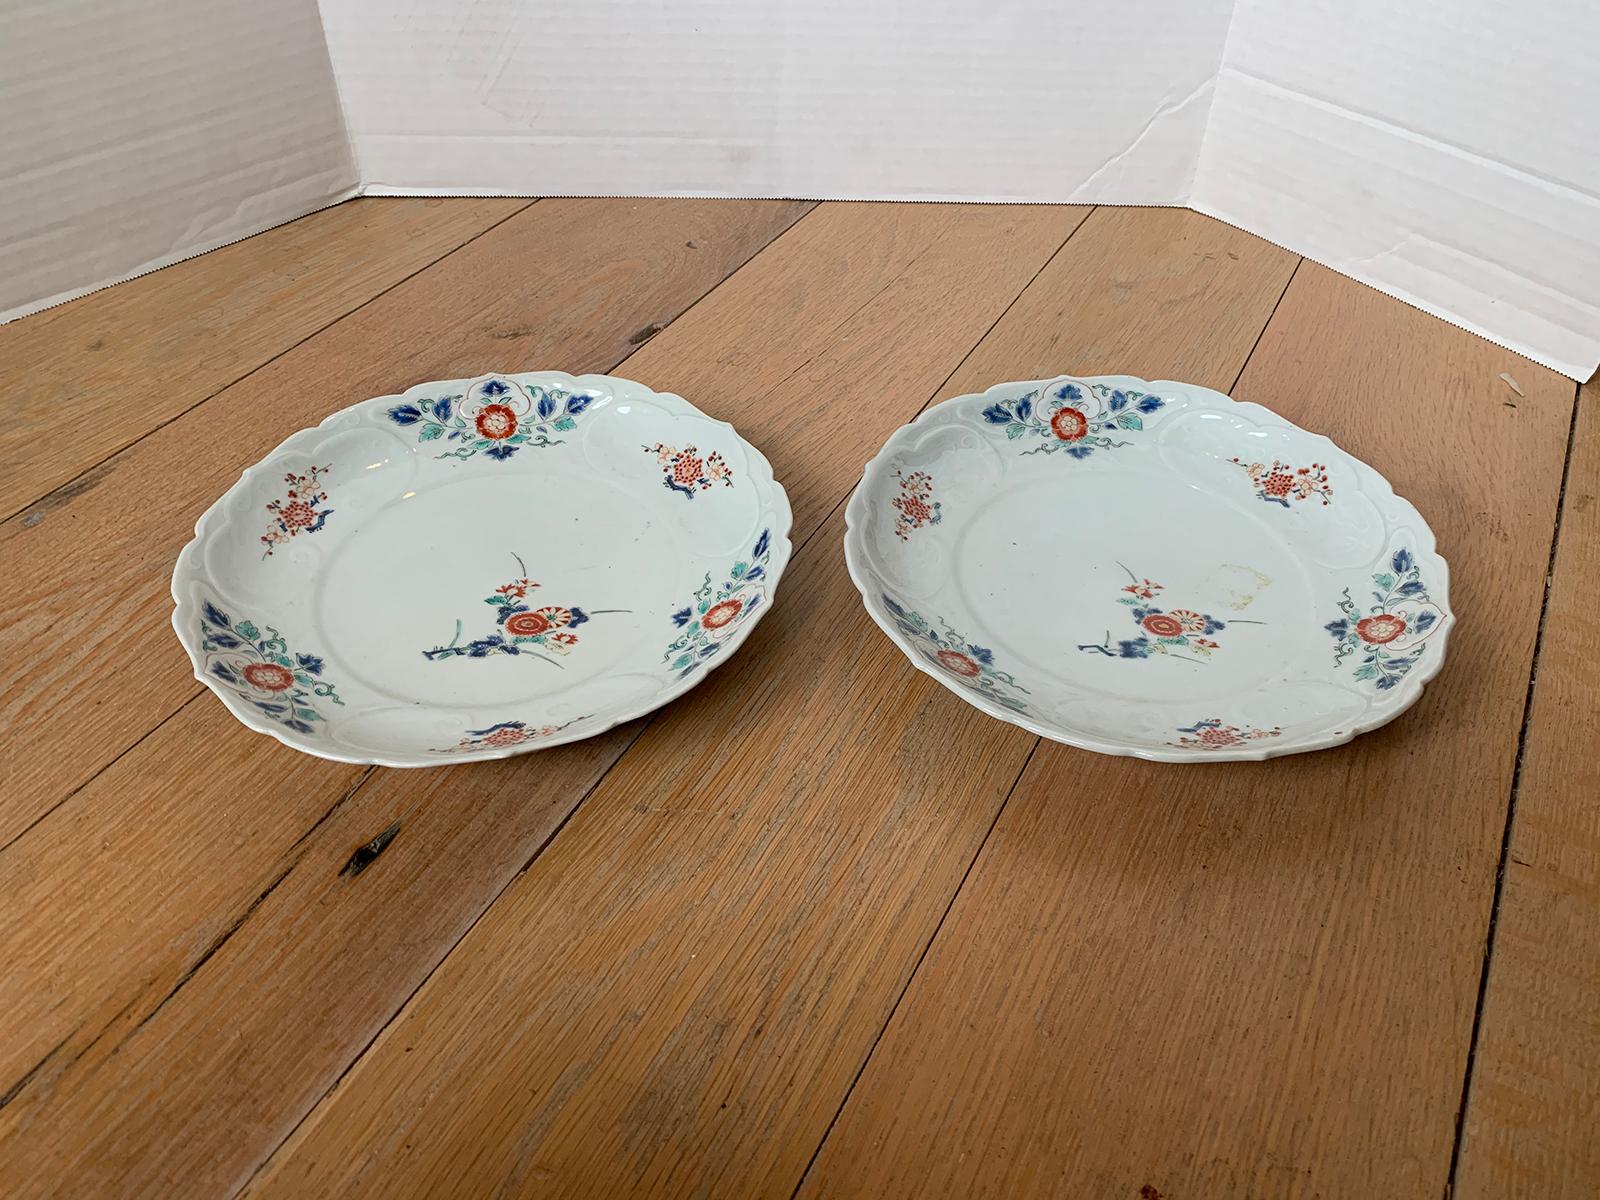 Pair of 19th Century Floral Round Porcelain Plates with Scalloped Edge, Unmarked For Sale 1